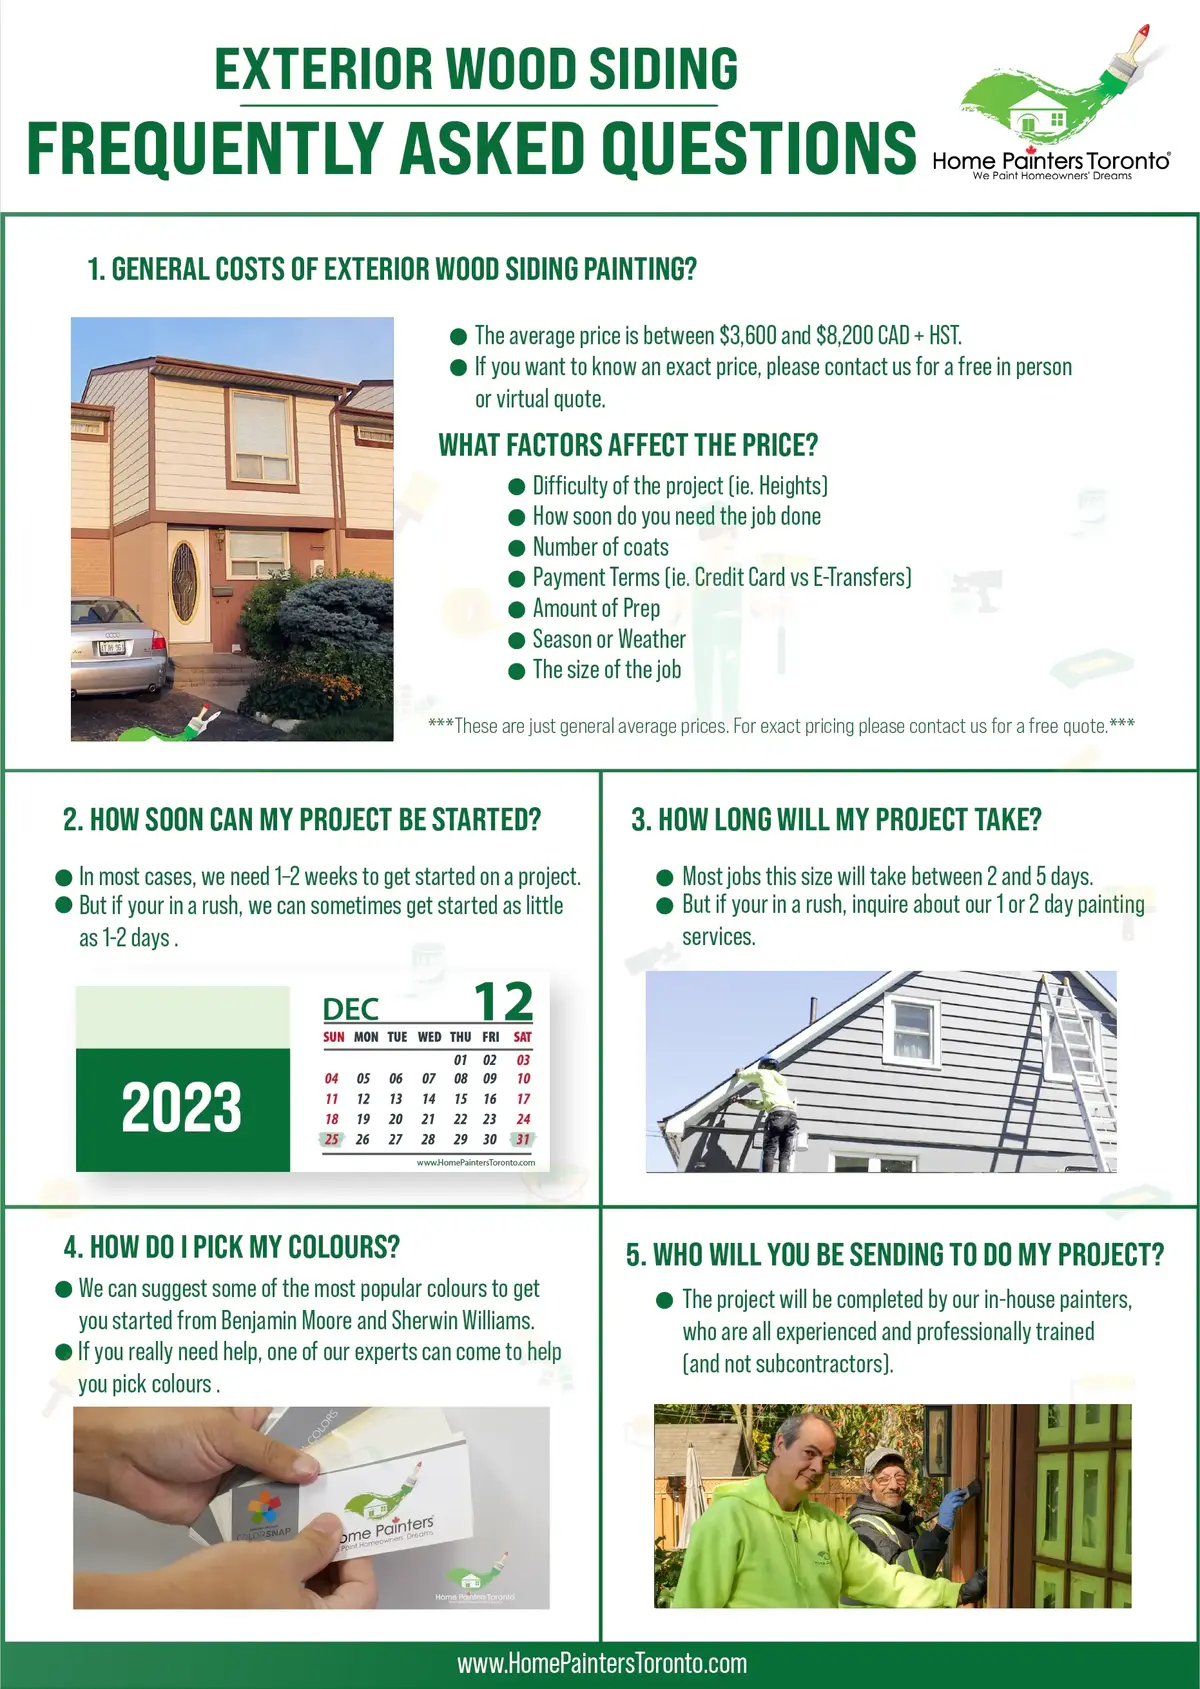 Infographic of frequently asked questions about exterior wood siding